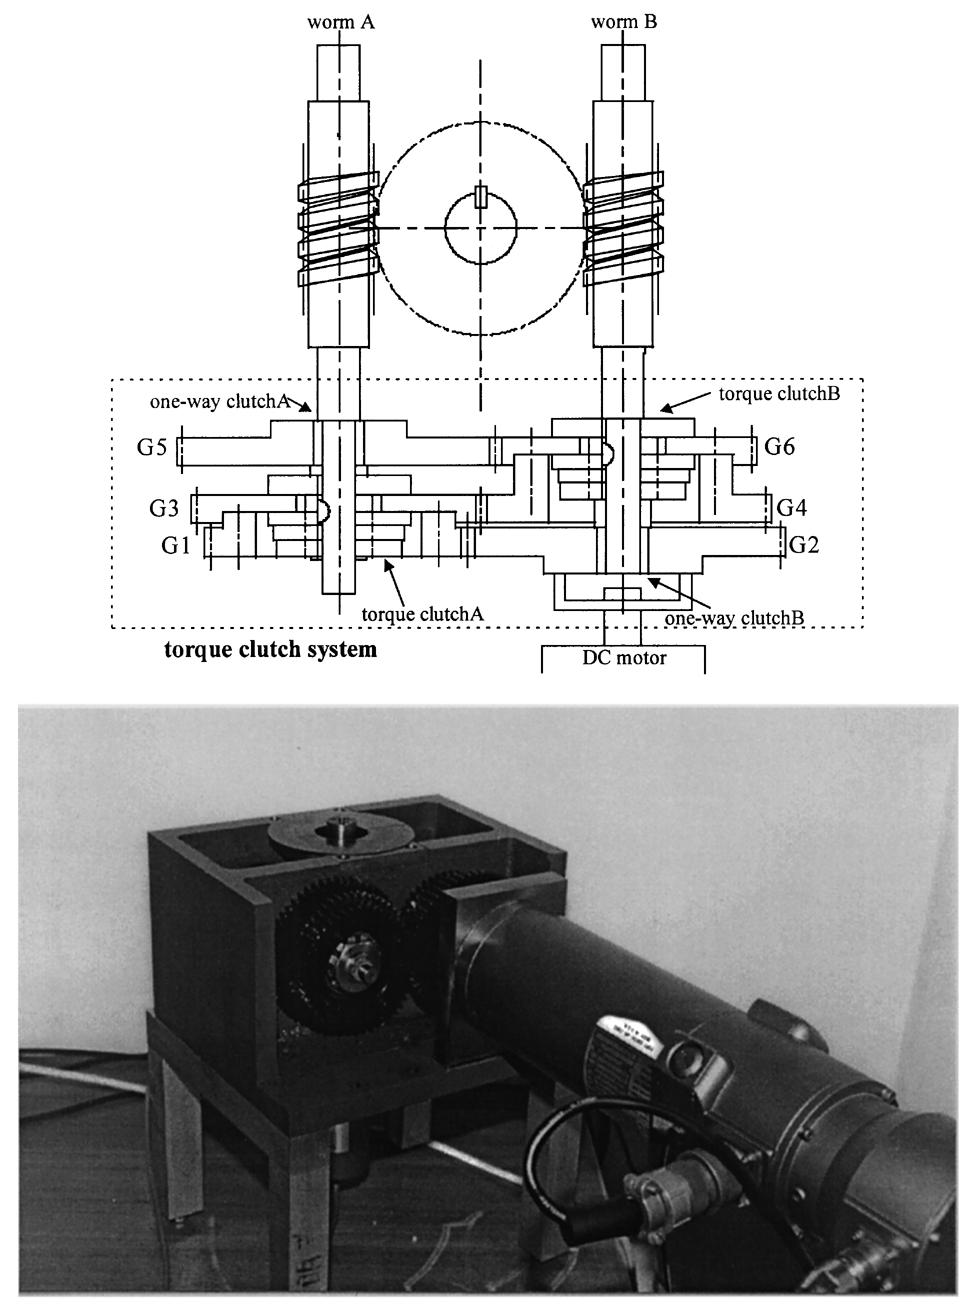 310 IEEE TRANSACTIONS ON CONTROL SYSTEMS TECHNOLOGY, VOL. 7, NO. 3, MAY 1999 Fig. 2. Traction type drive device (TTDD).